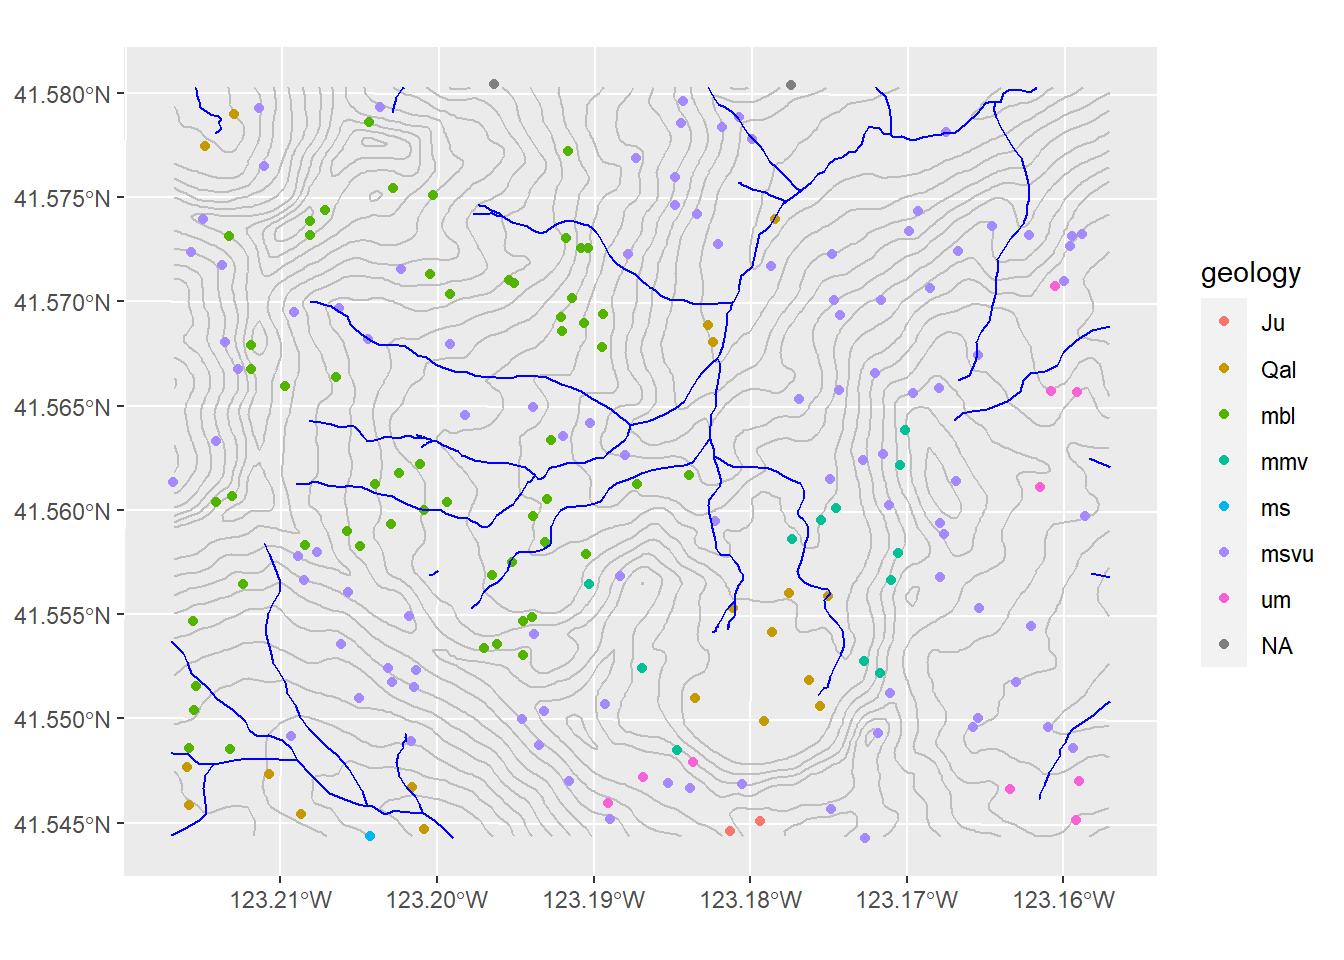 An identical raster distance output created using a template raster